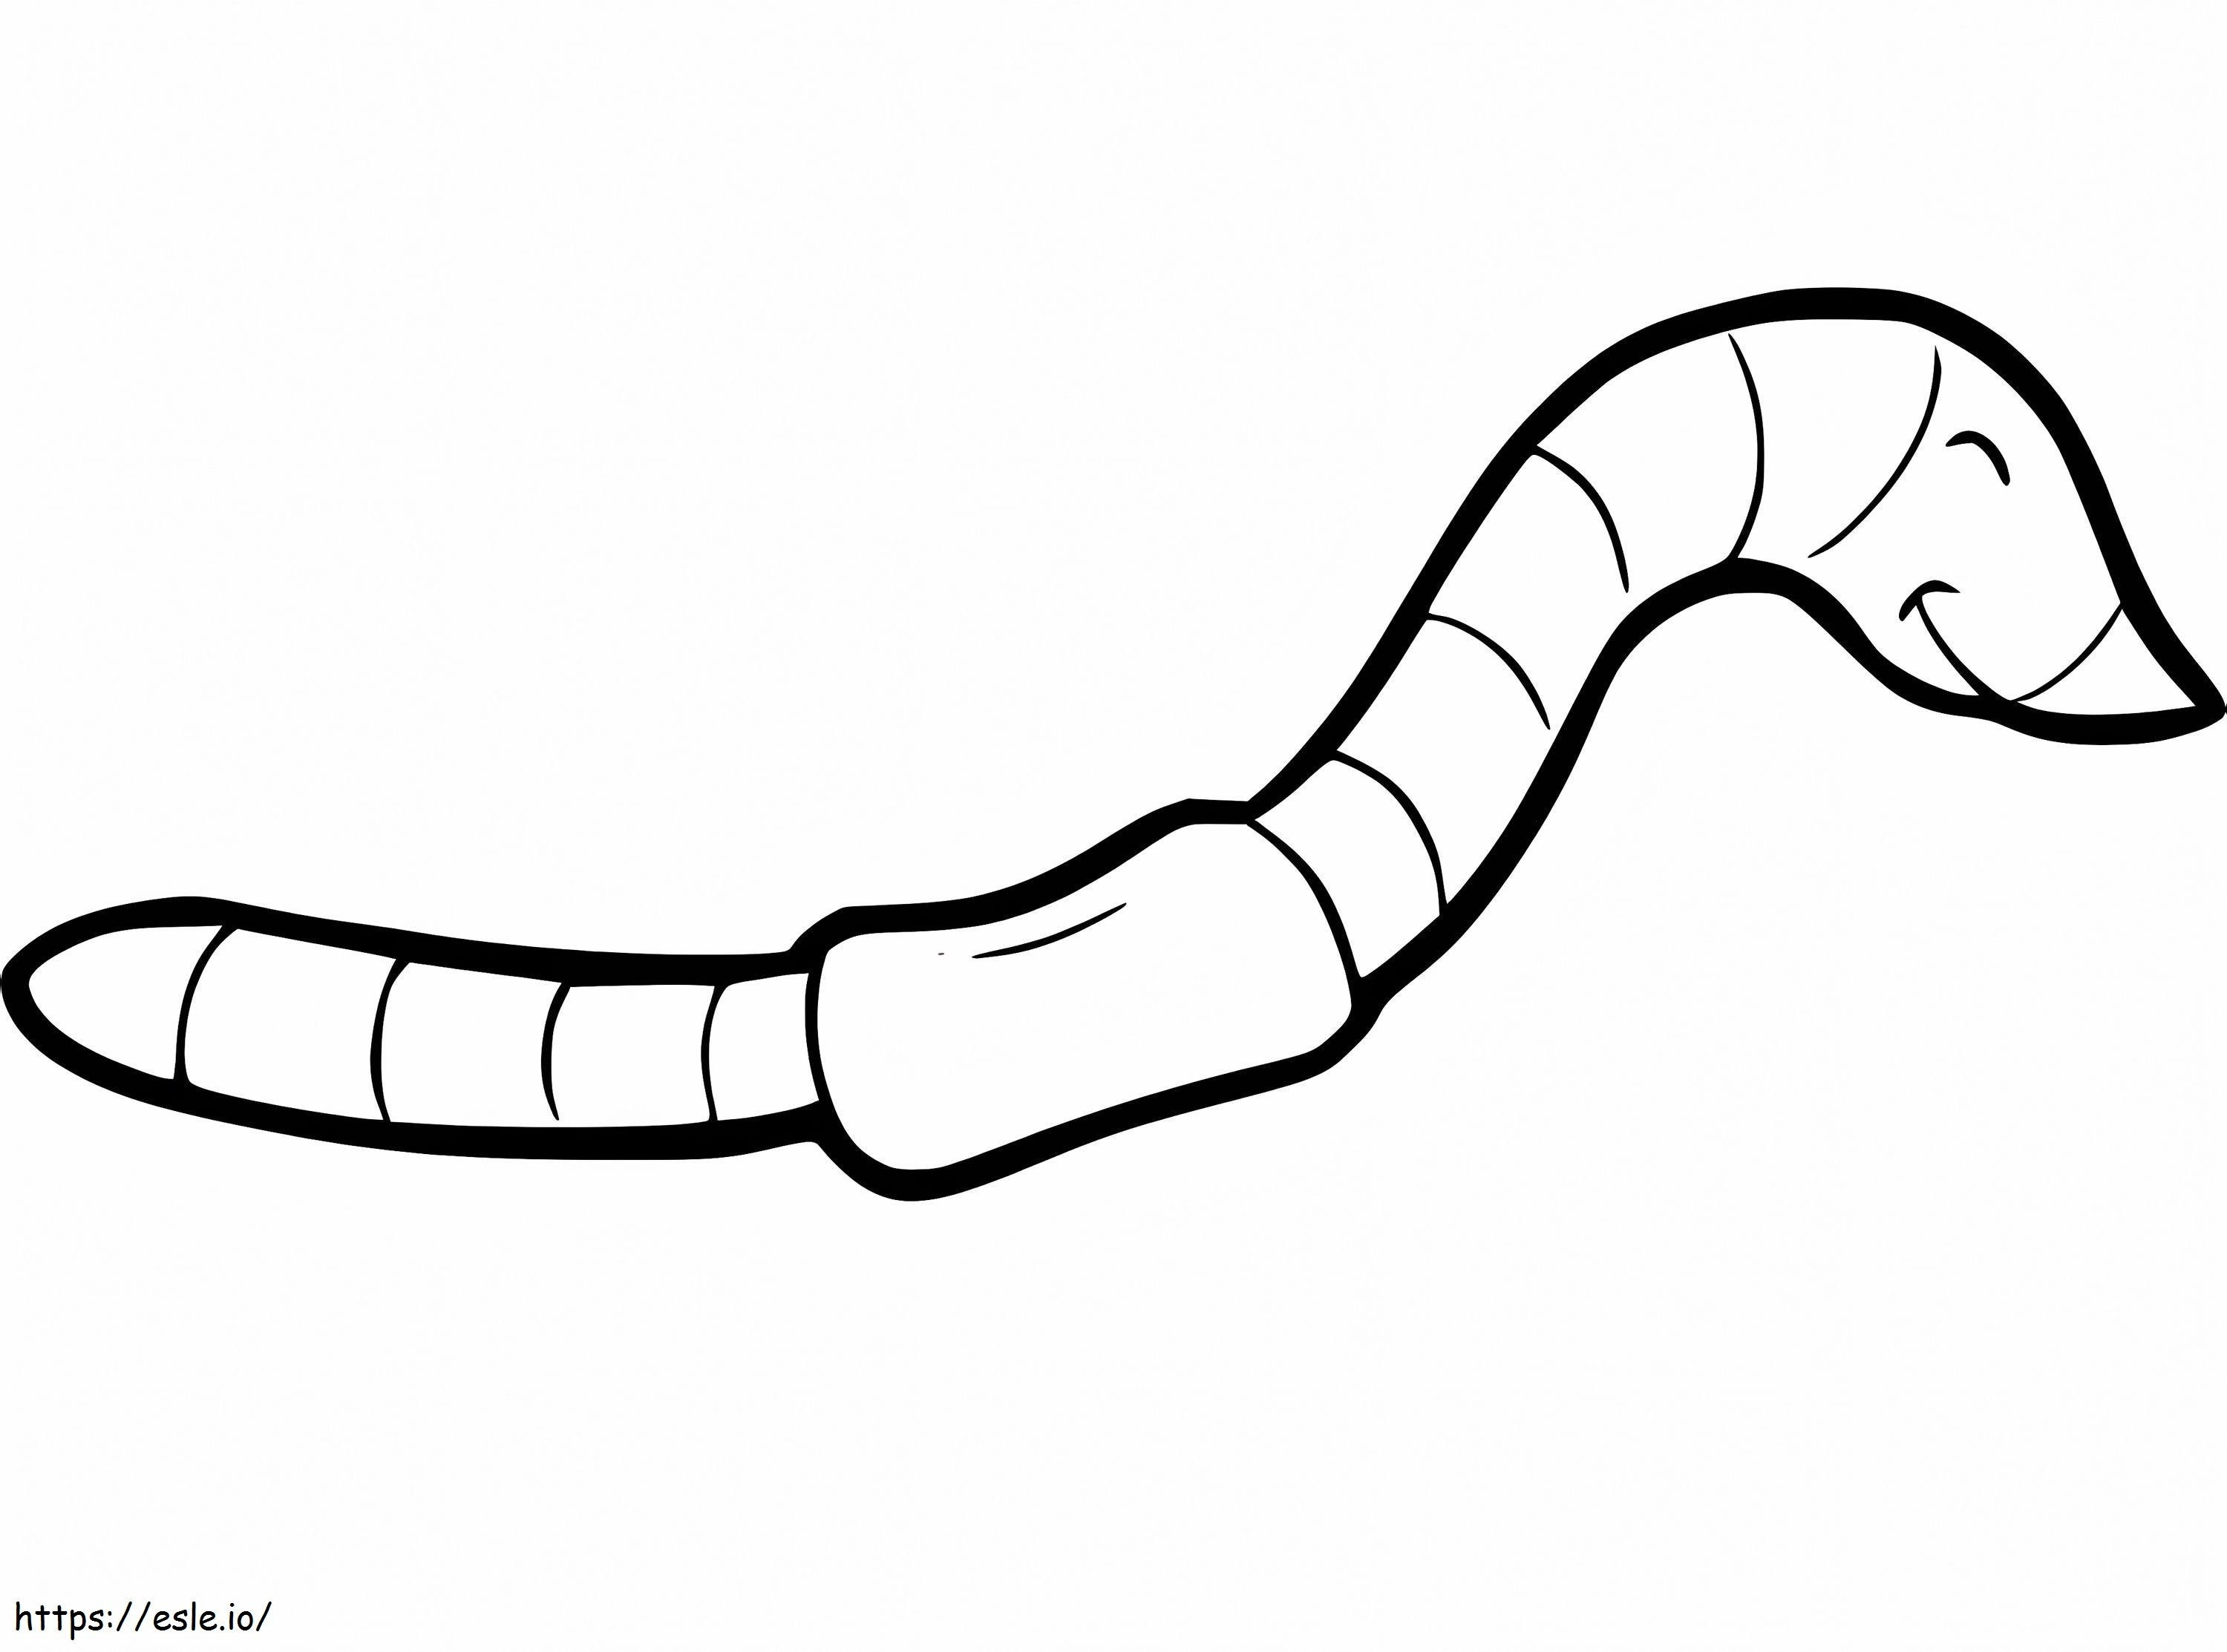 Easy Earthworm coloring page